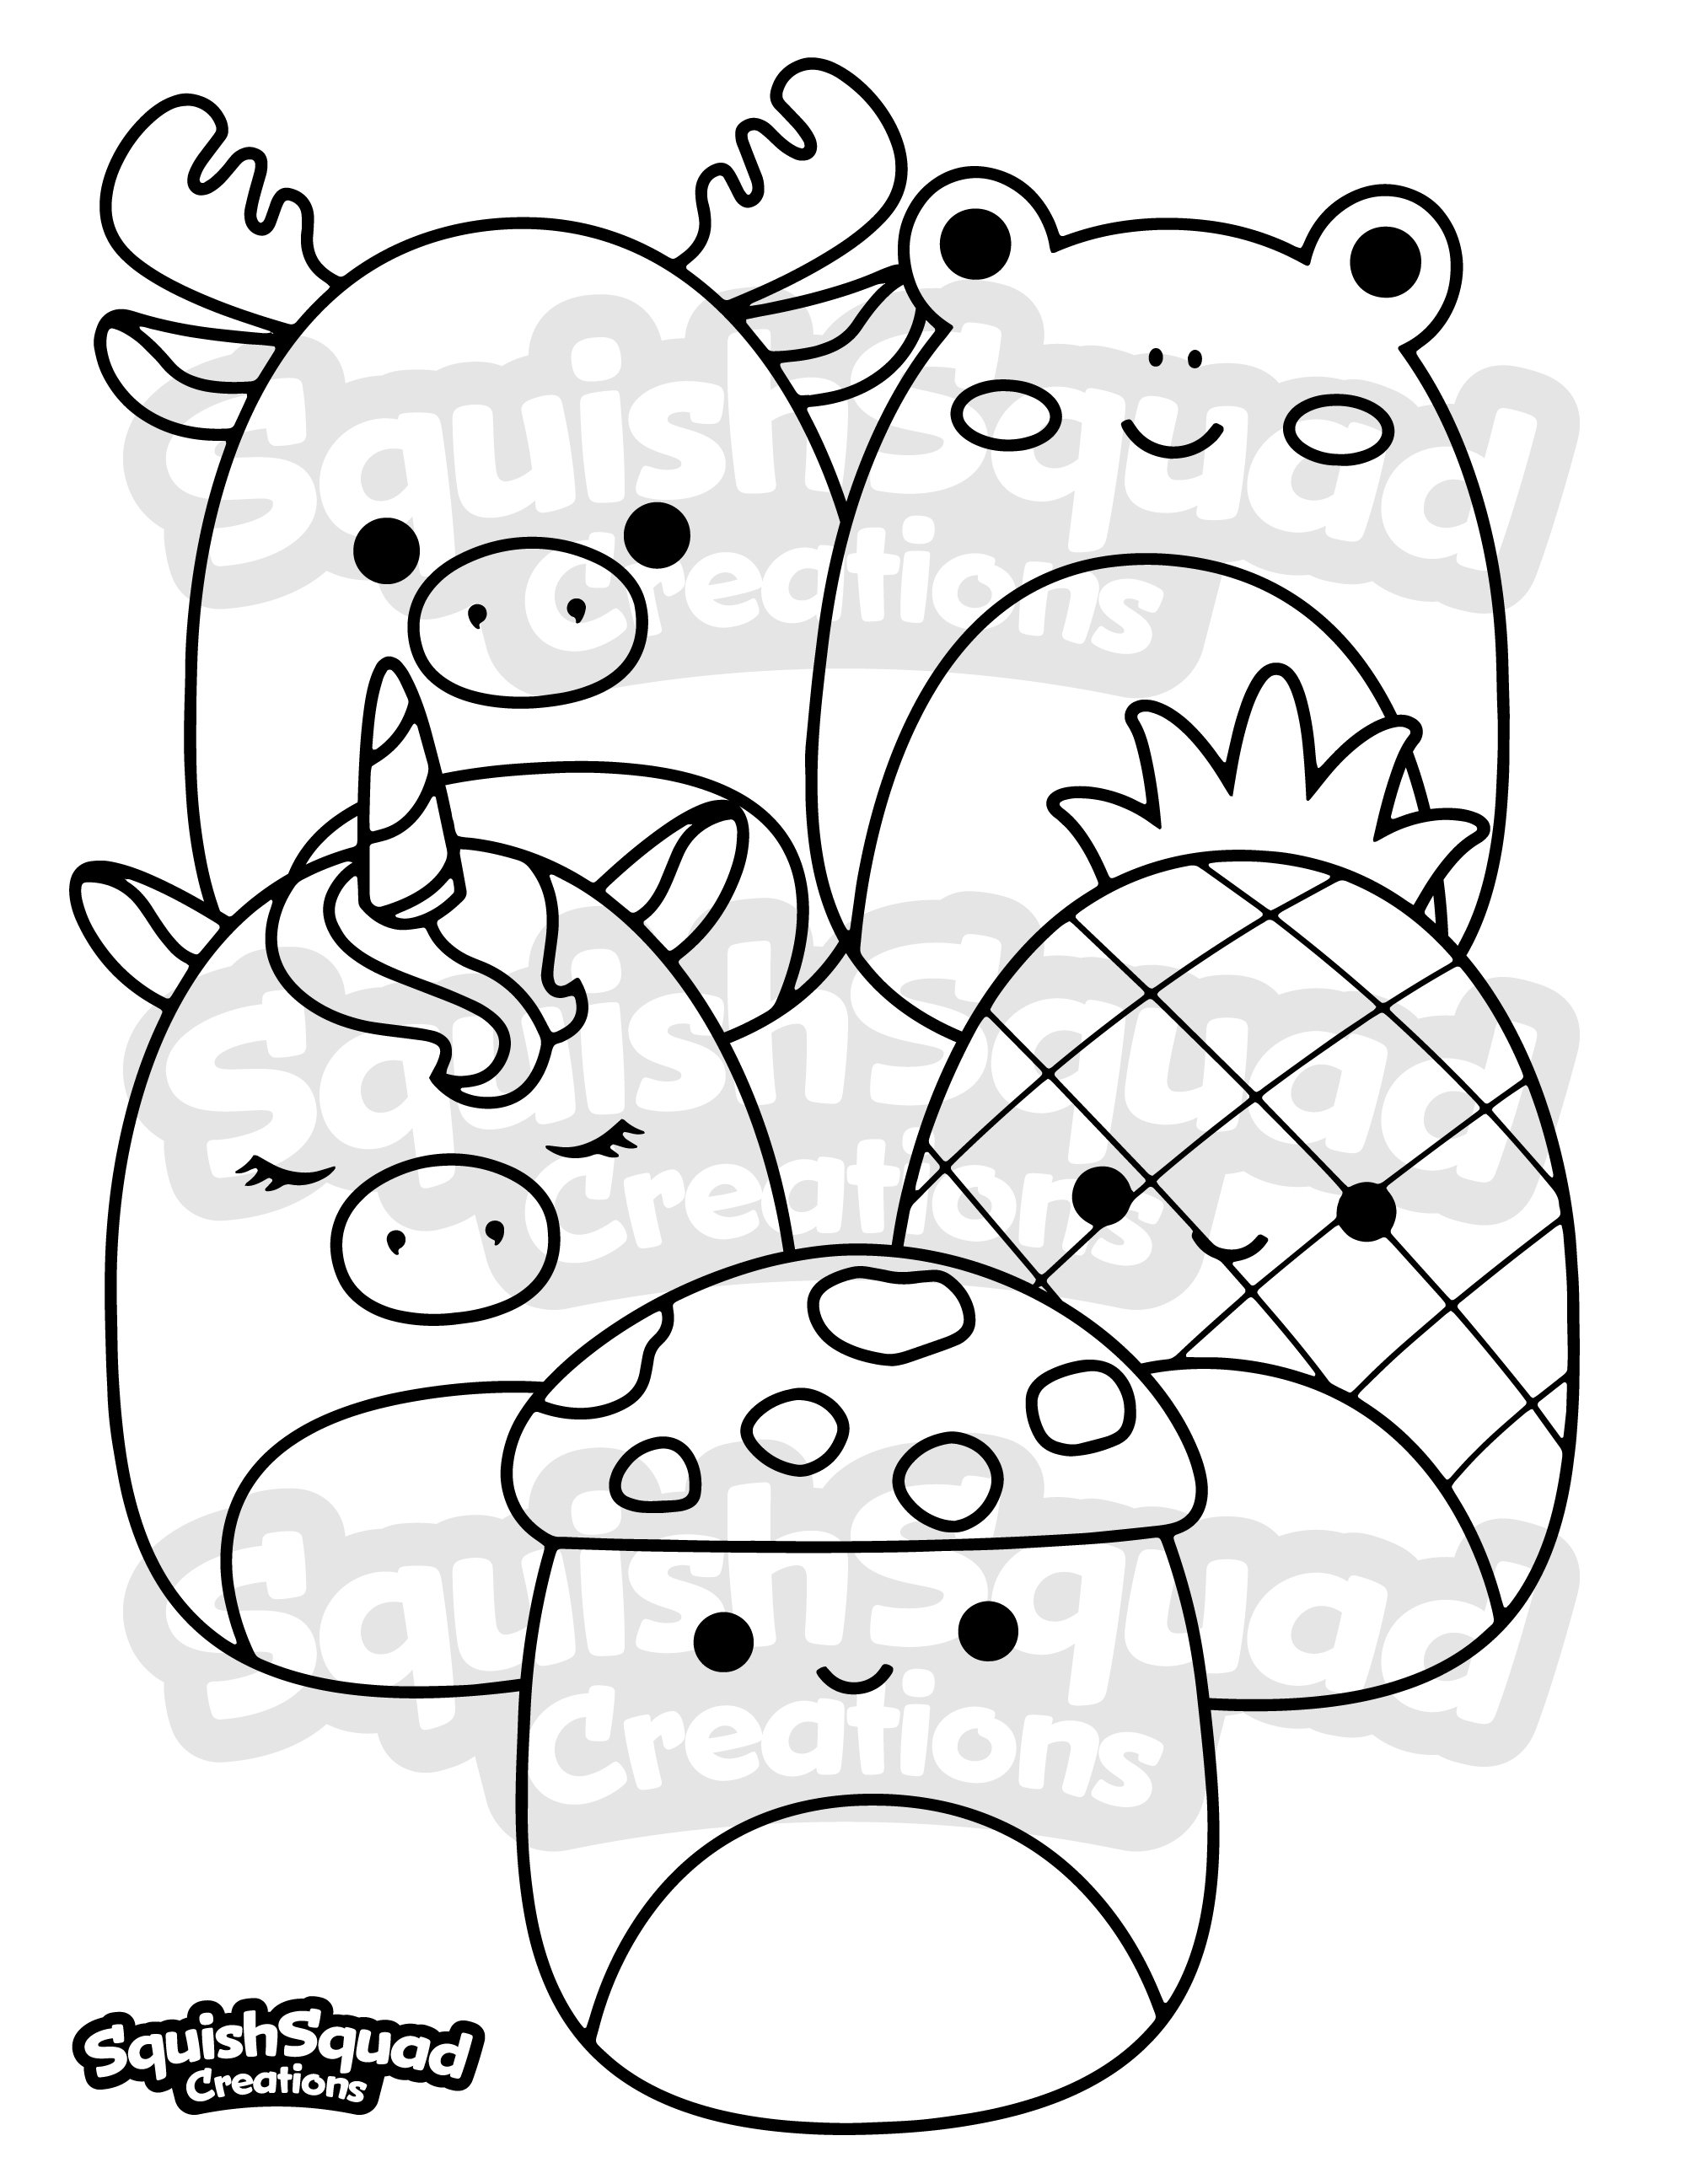 Cake Coloring Page - Etsy